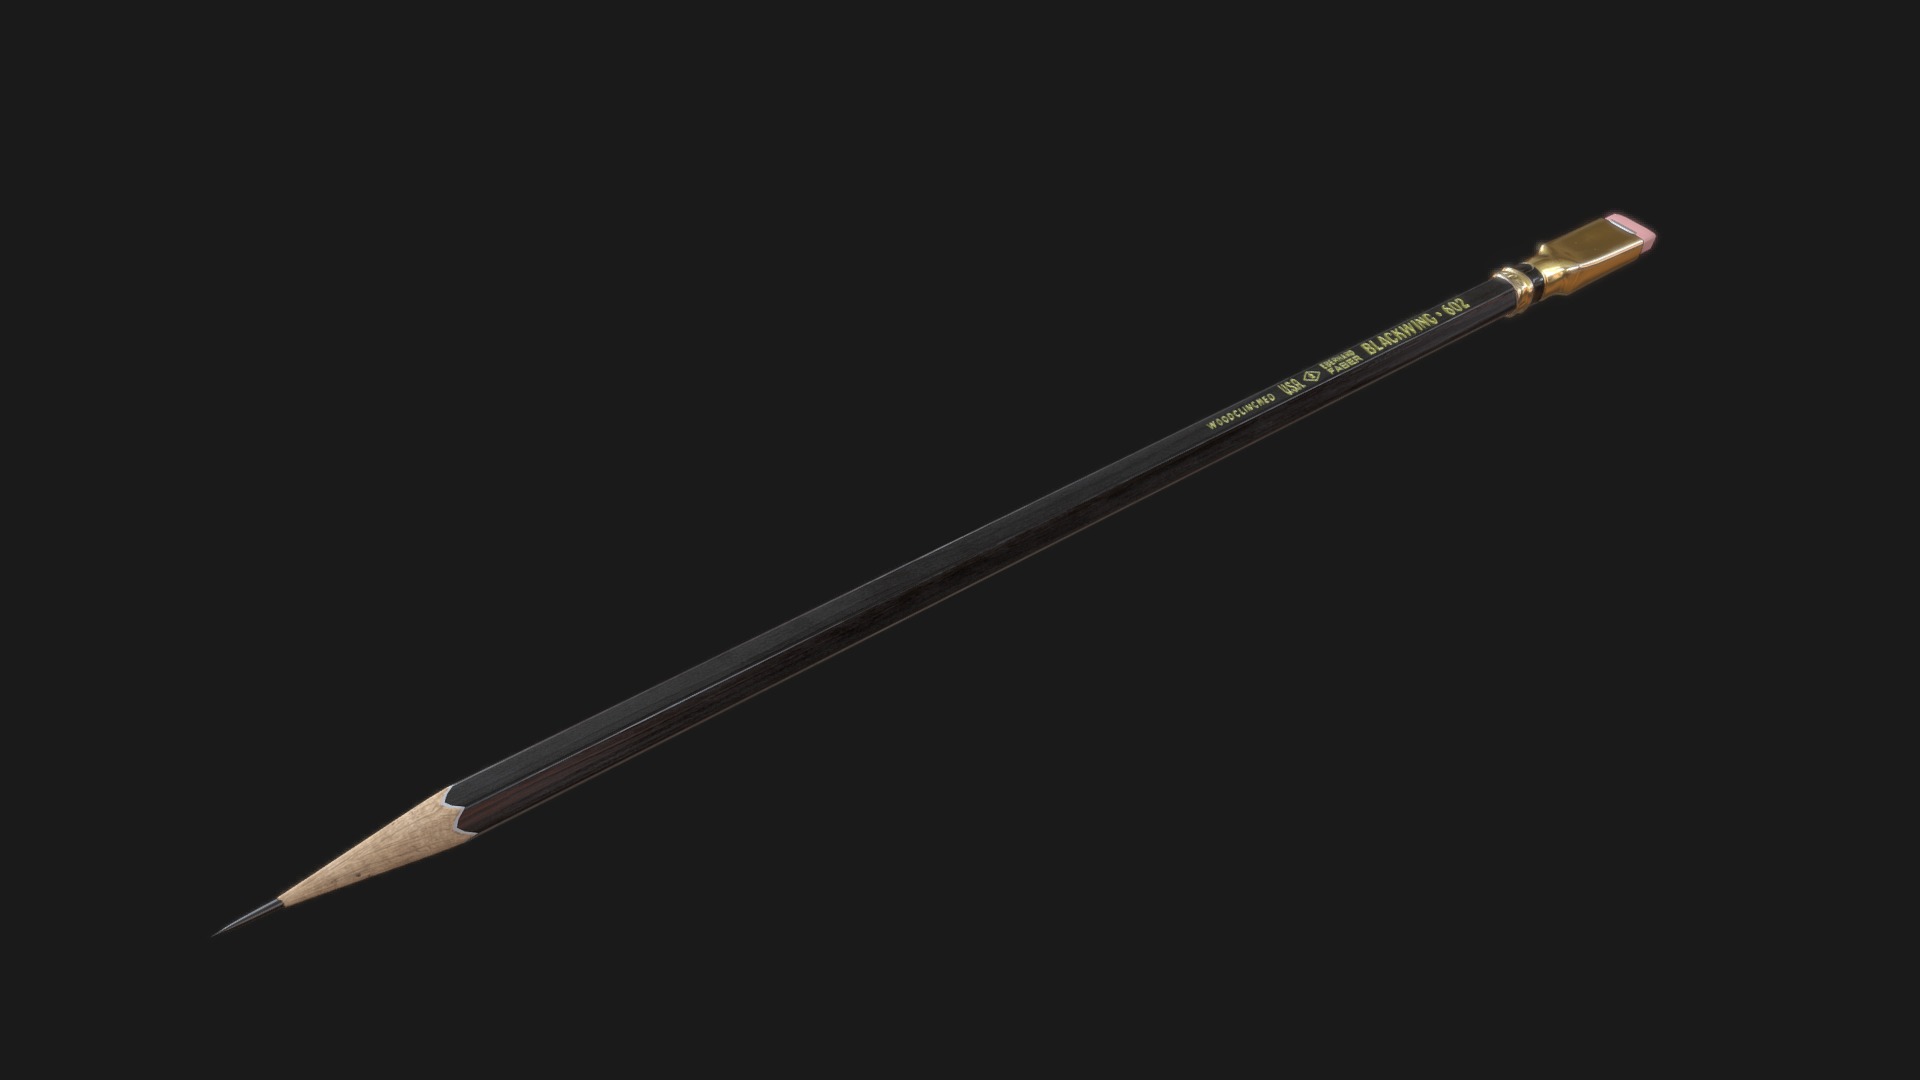 3D model Eberhart Faber Blackwing 602 pencil - This is a 3D model of the Eberhart Faber Blackwing 602 pencil. The 3D model is about a sword with a long handle.